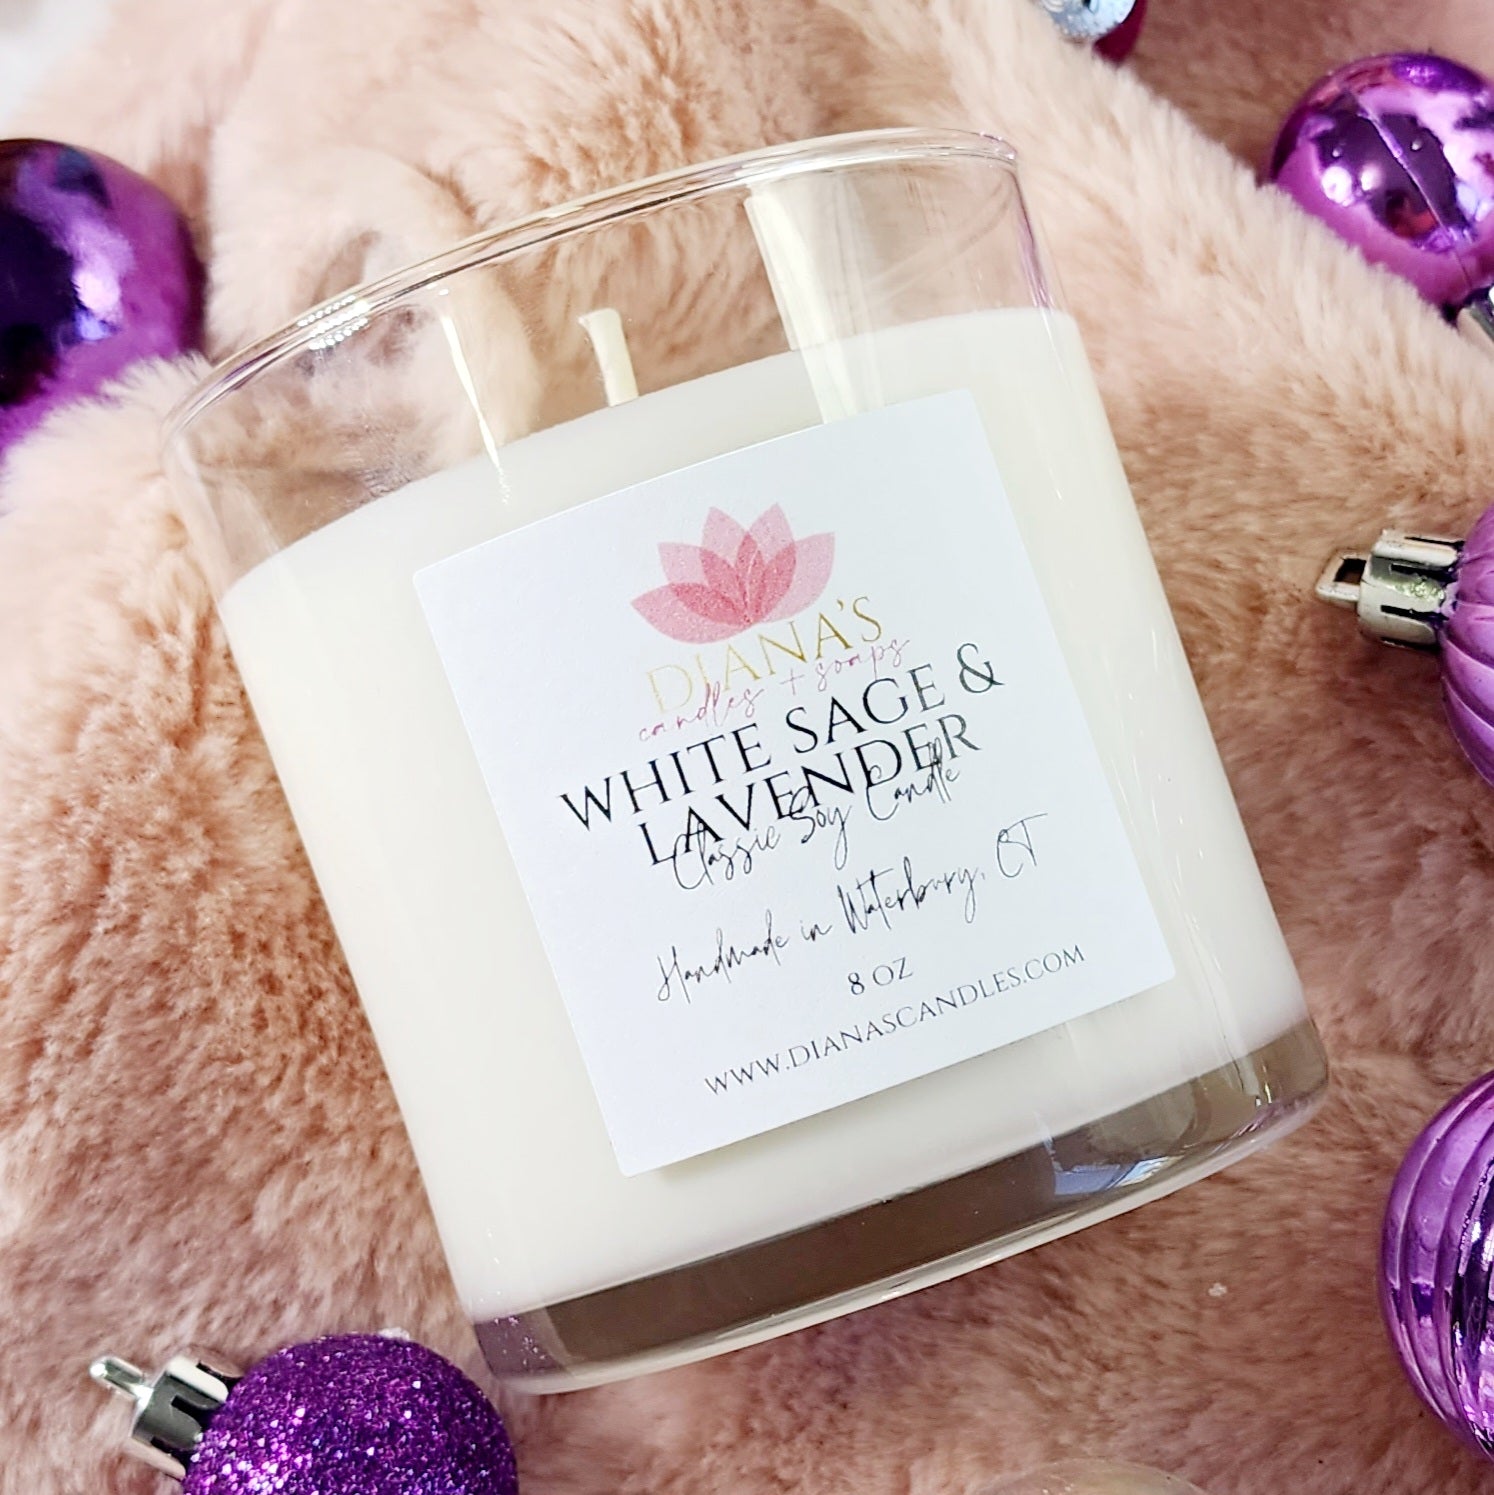 White Sage & Lavender Candle - Diana's Candles and Soaps 